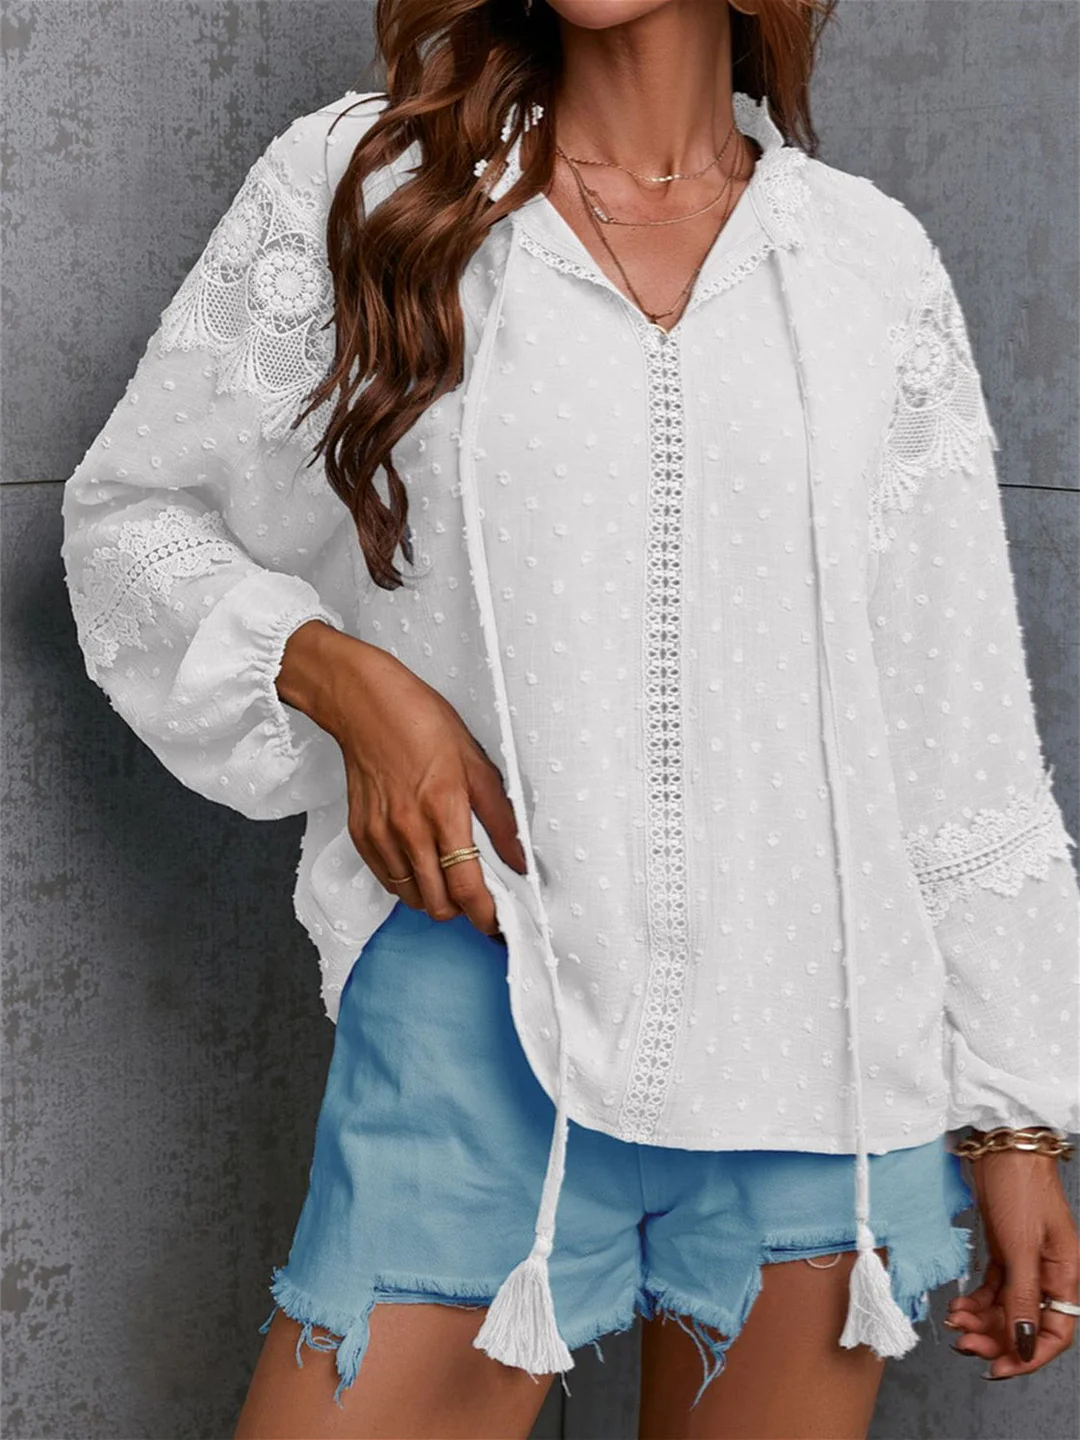 Women's Long Sleeve V-neck Lace Floral Printed Tops